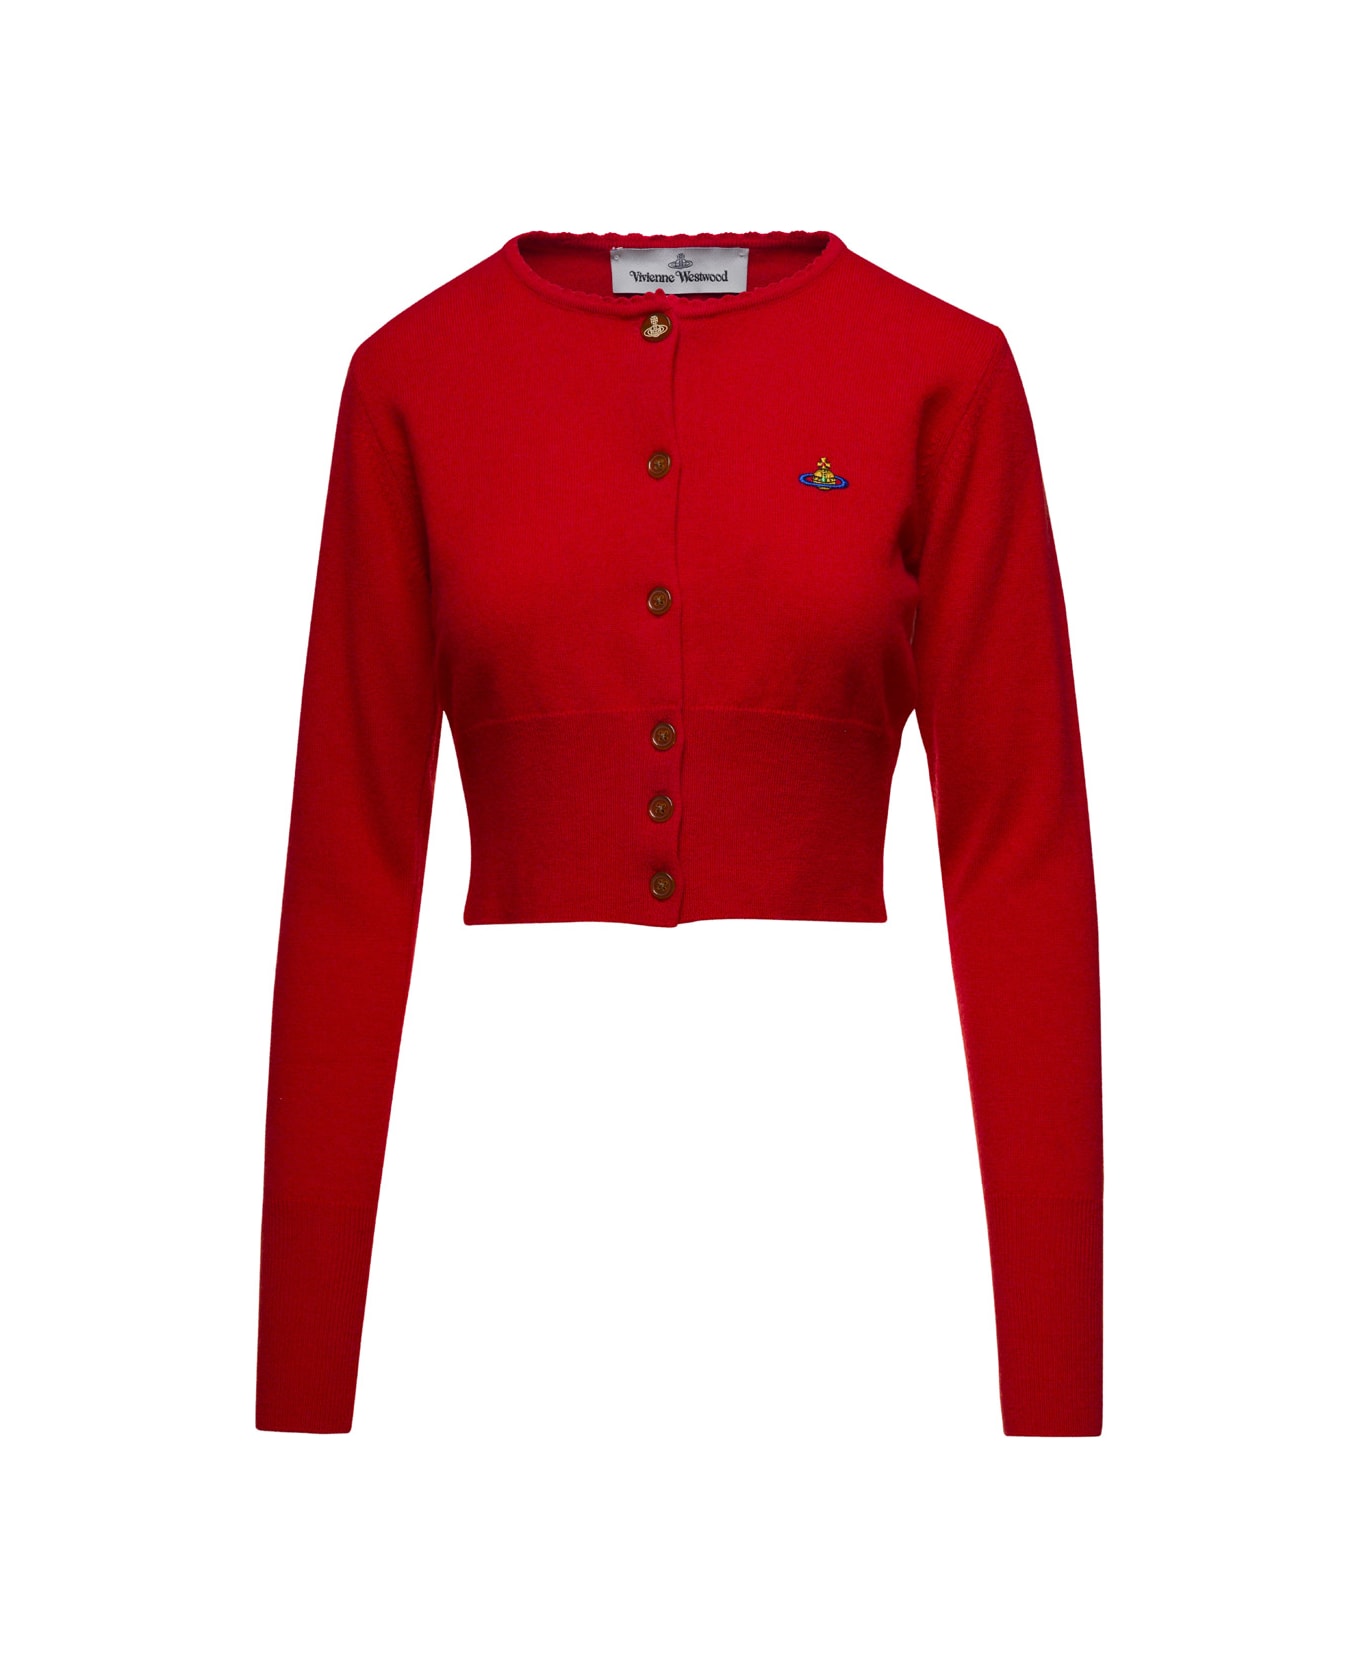 Vivienne Westwood Red Cardigan With Signature Embroidered Orb Logo In Cotton Woman - Red ニットウェア